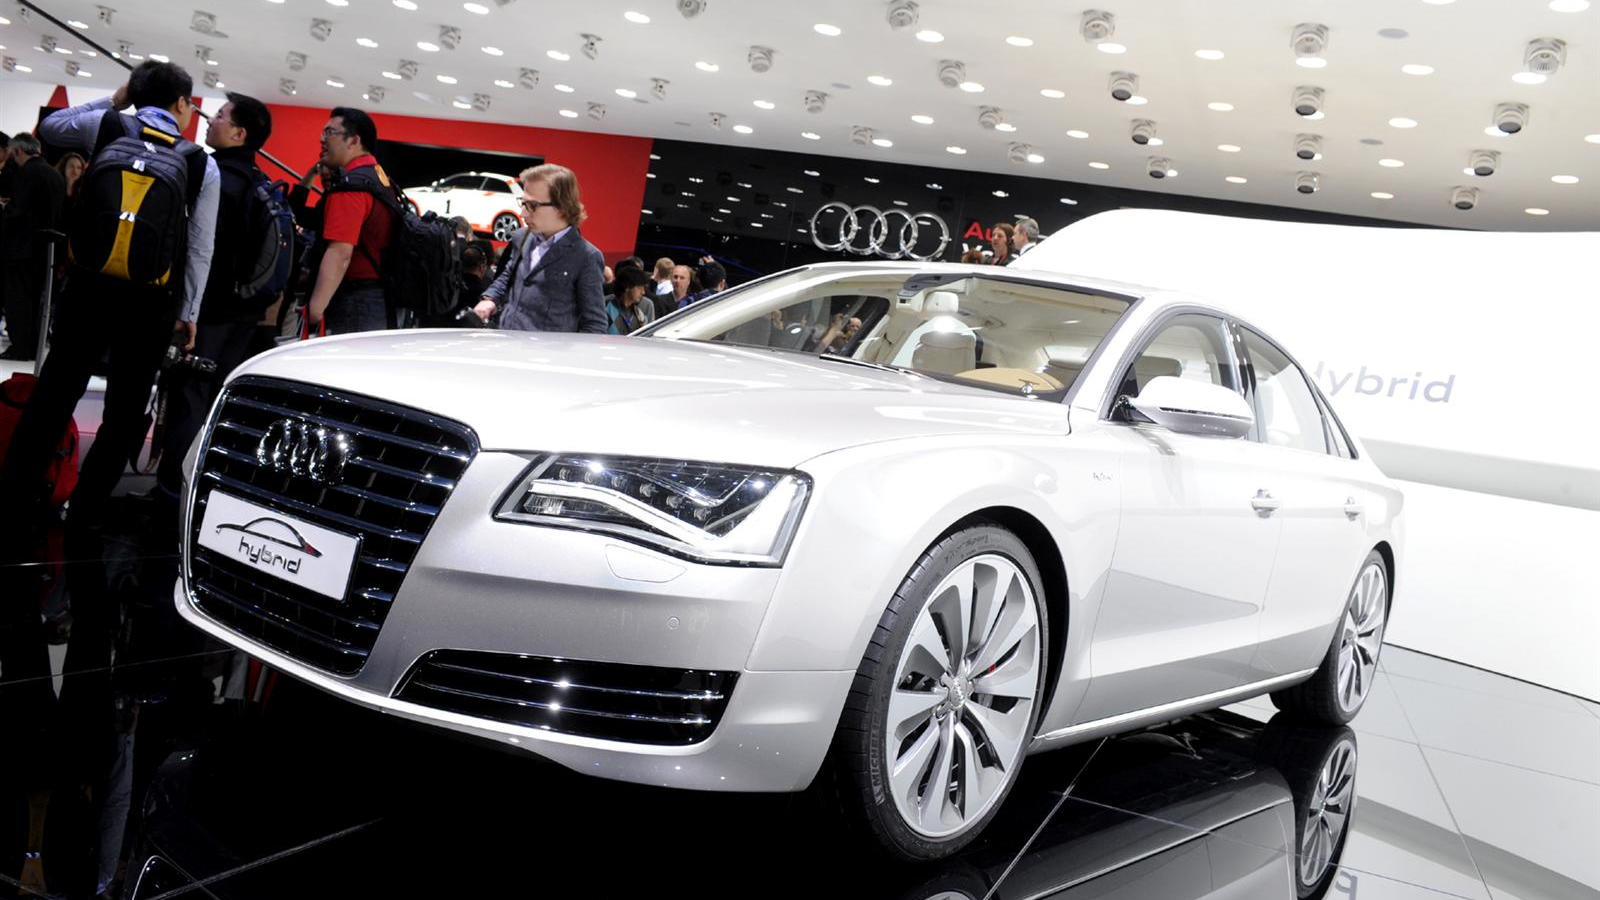 2012 Audi A8 Hybrid live in Geneva. Photos © United Pictures, Int'l.